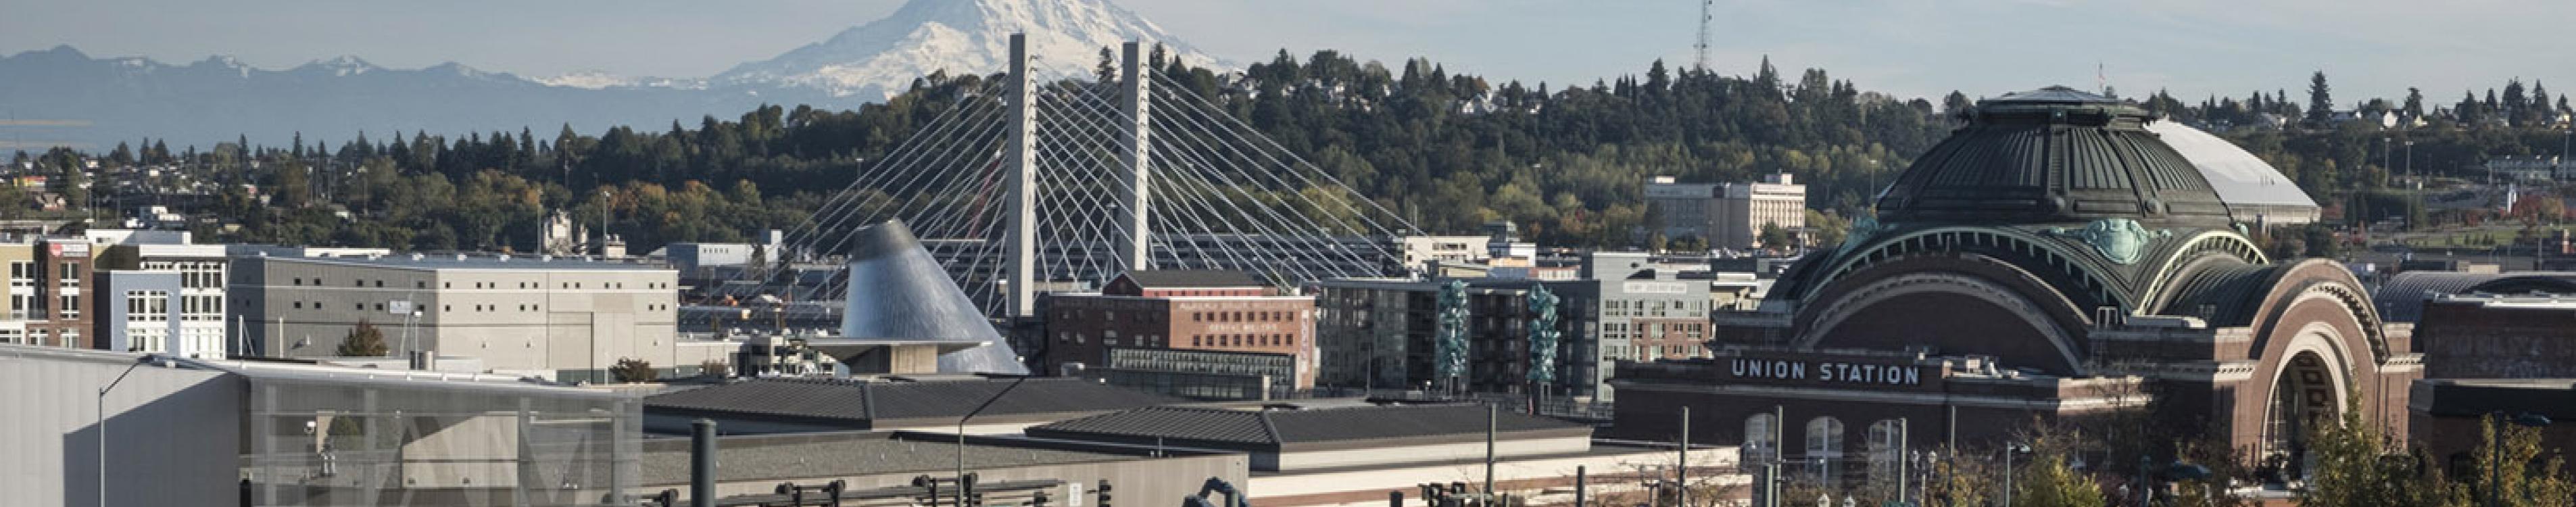 Downtown Tacoma with Mount Rainier in the background